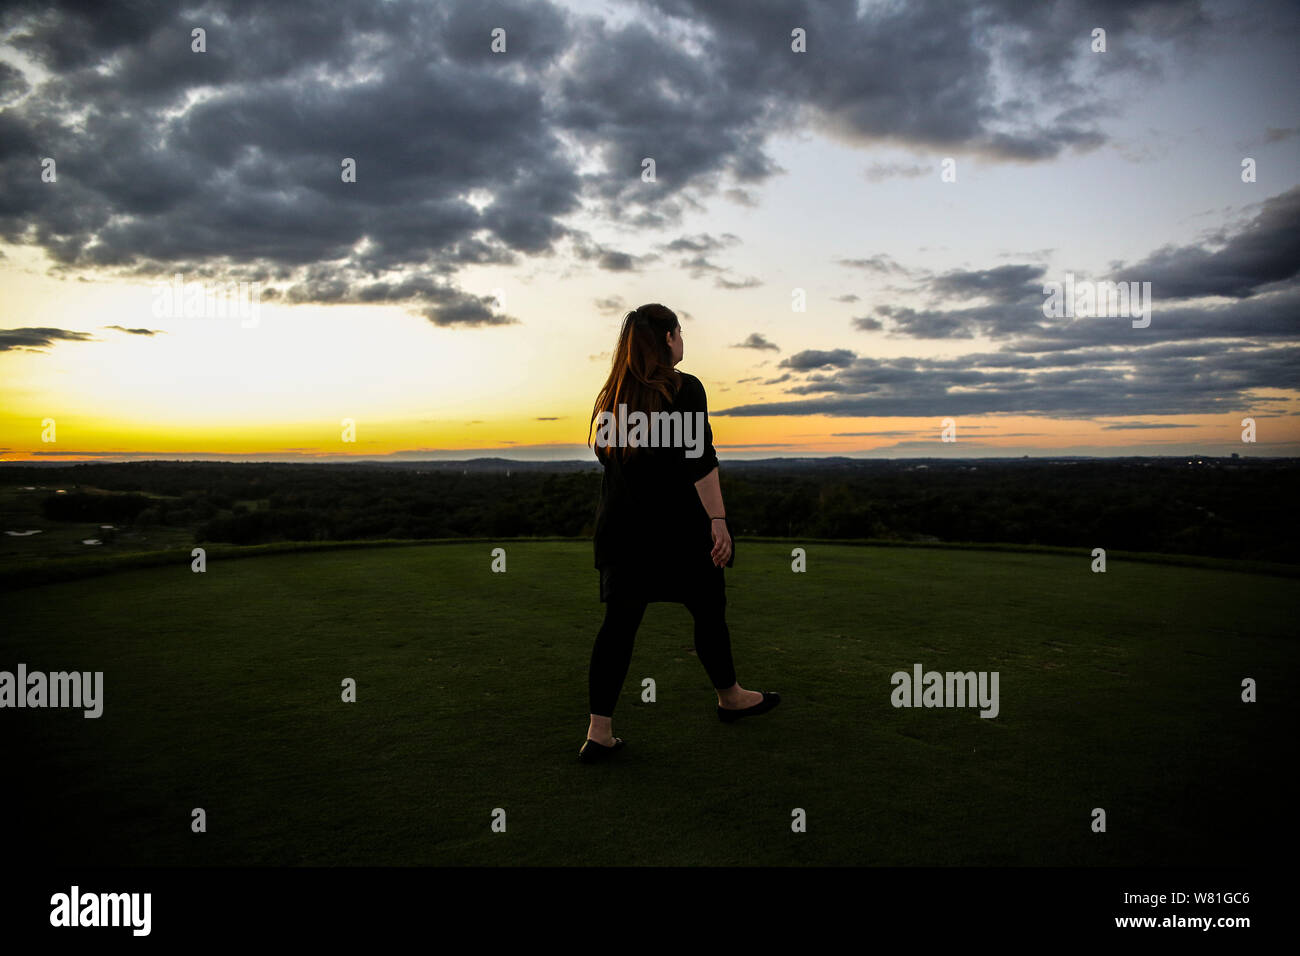 Rear View of Mid-Adult Woman on Hilltop at Sunset Stock Photo